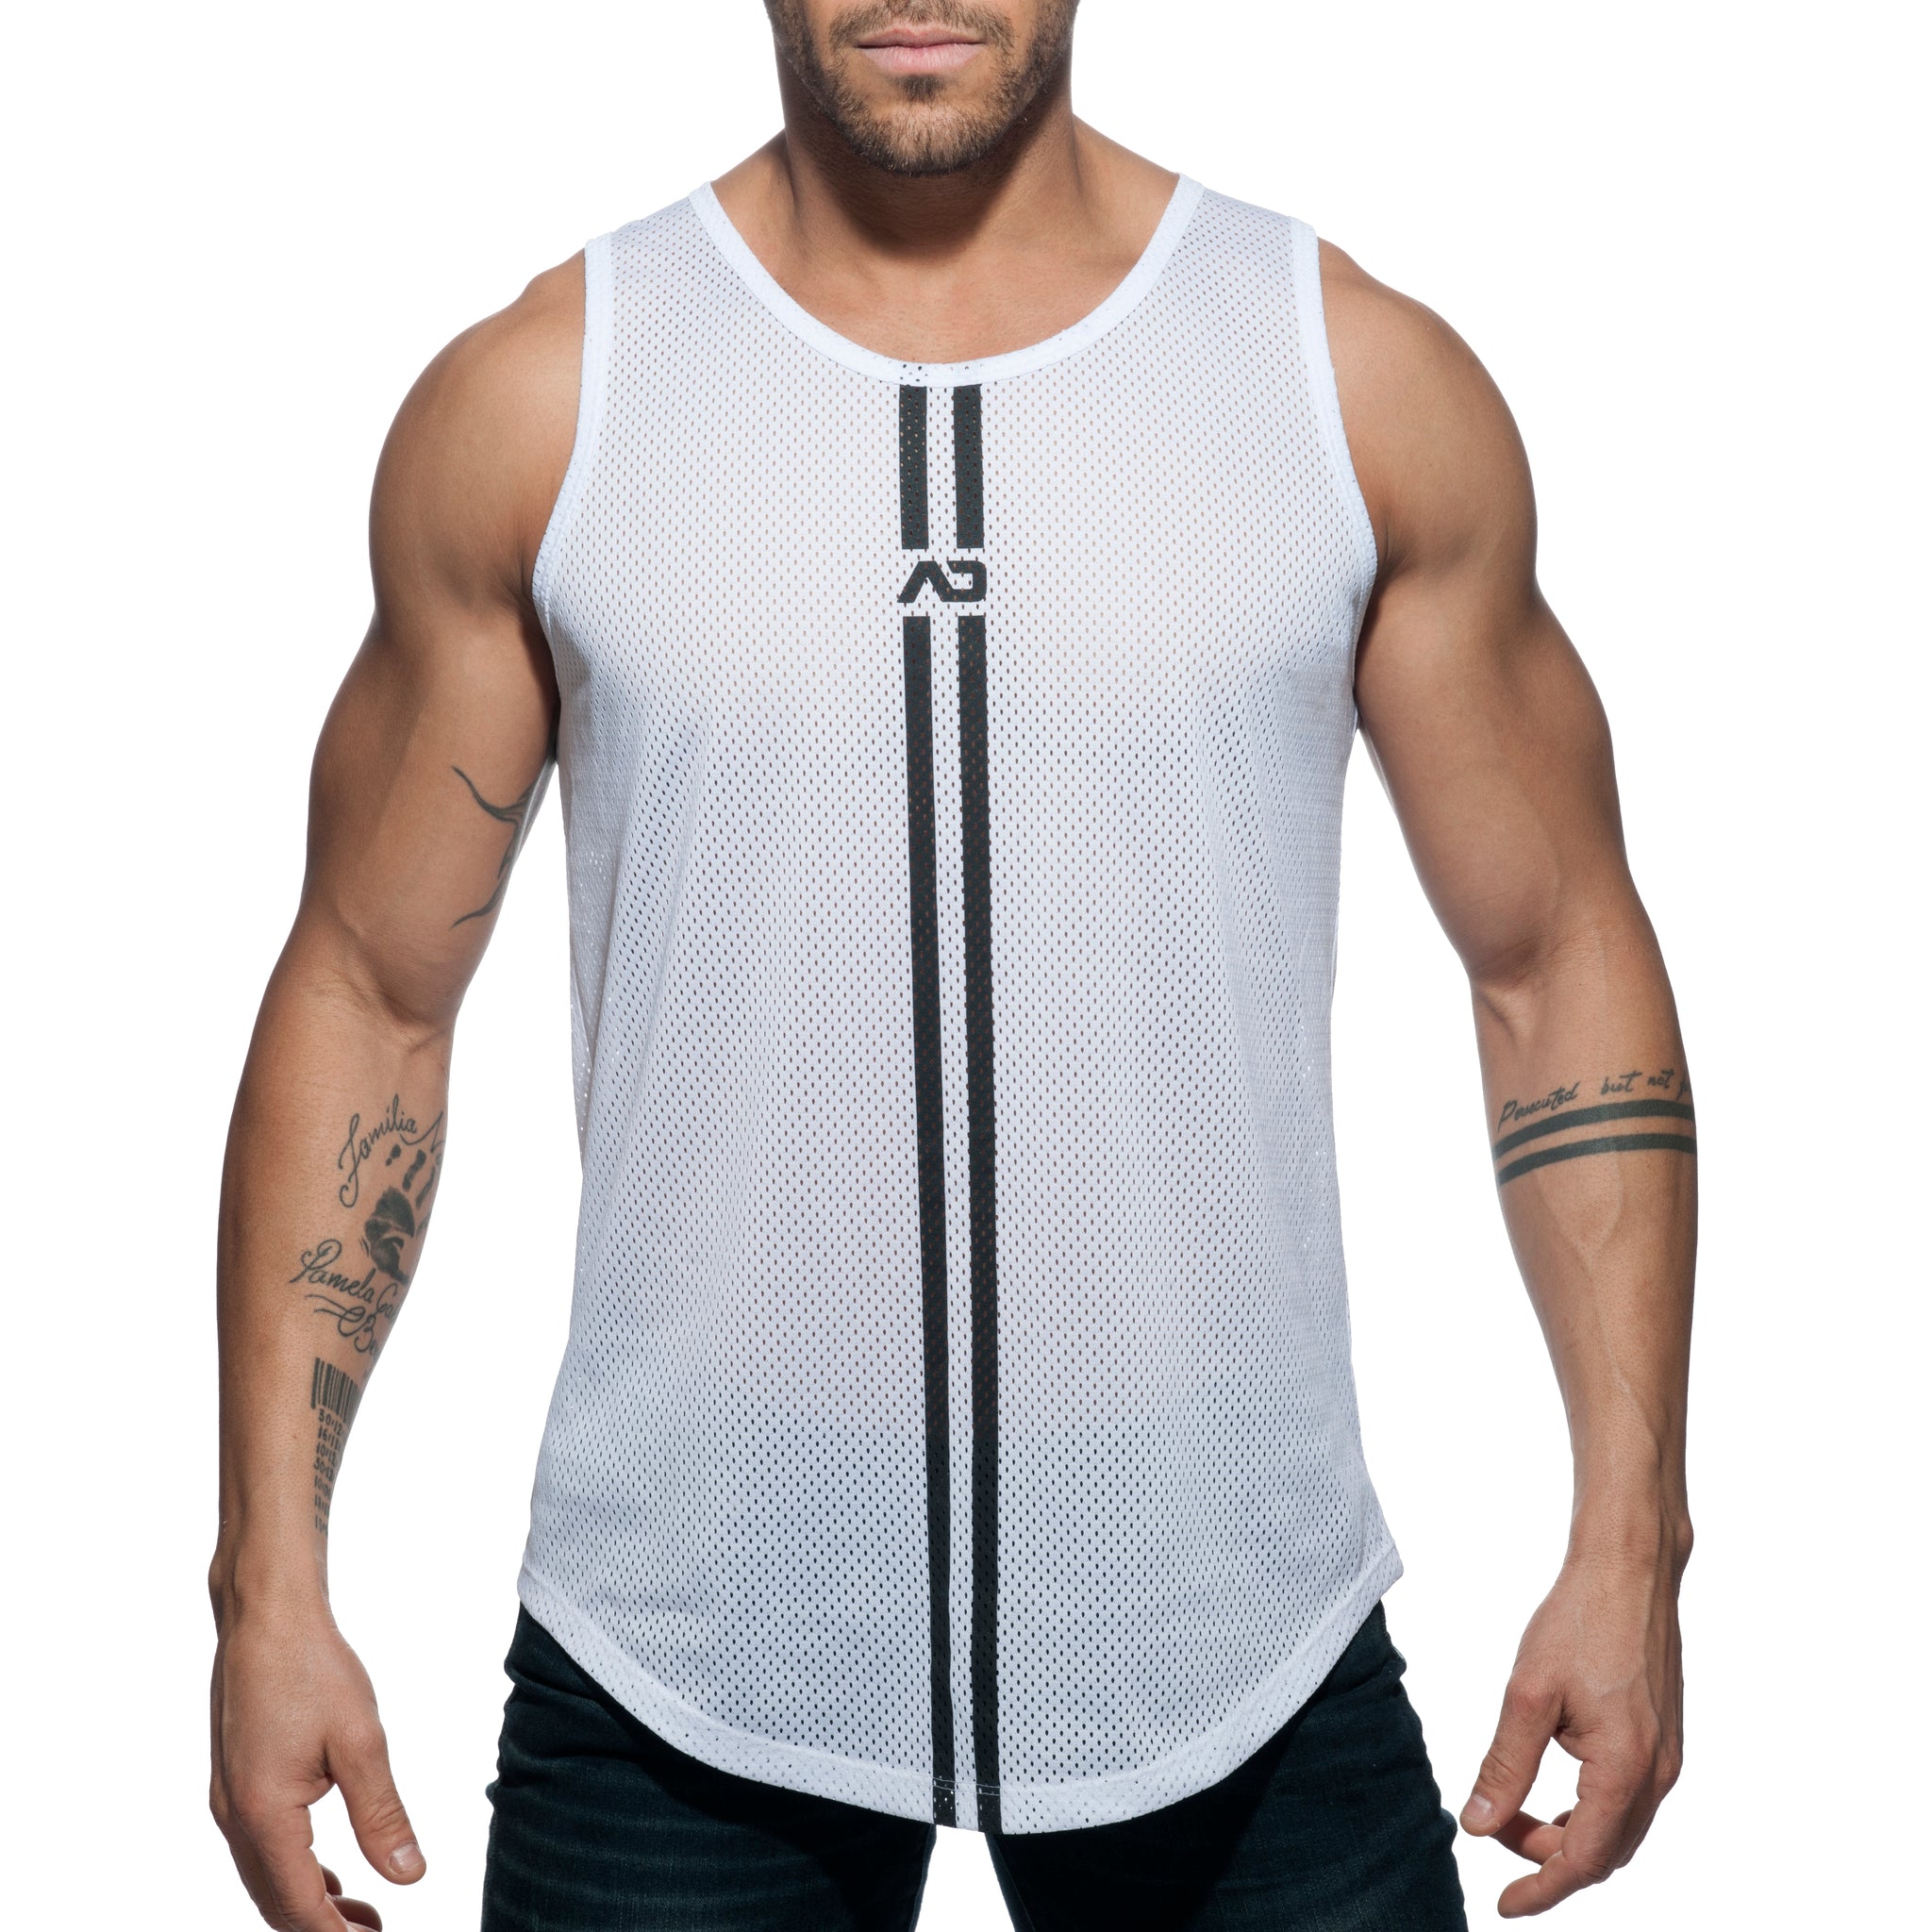 Addicted Double Stripe Tank Top White AD671